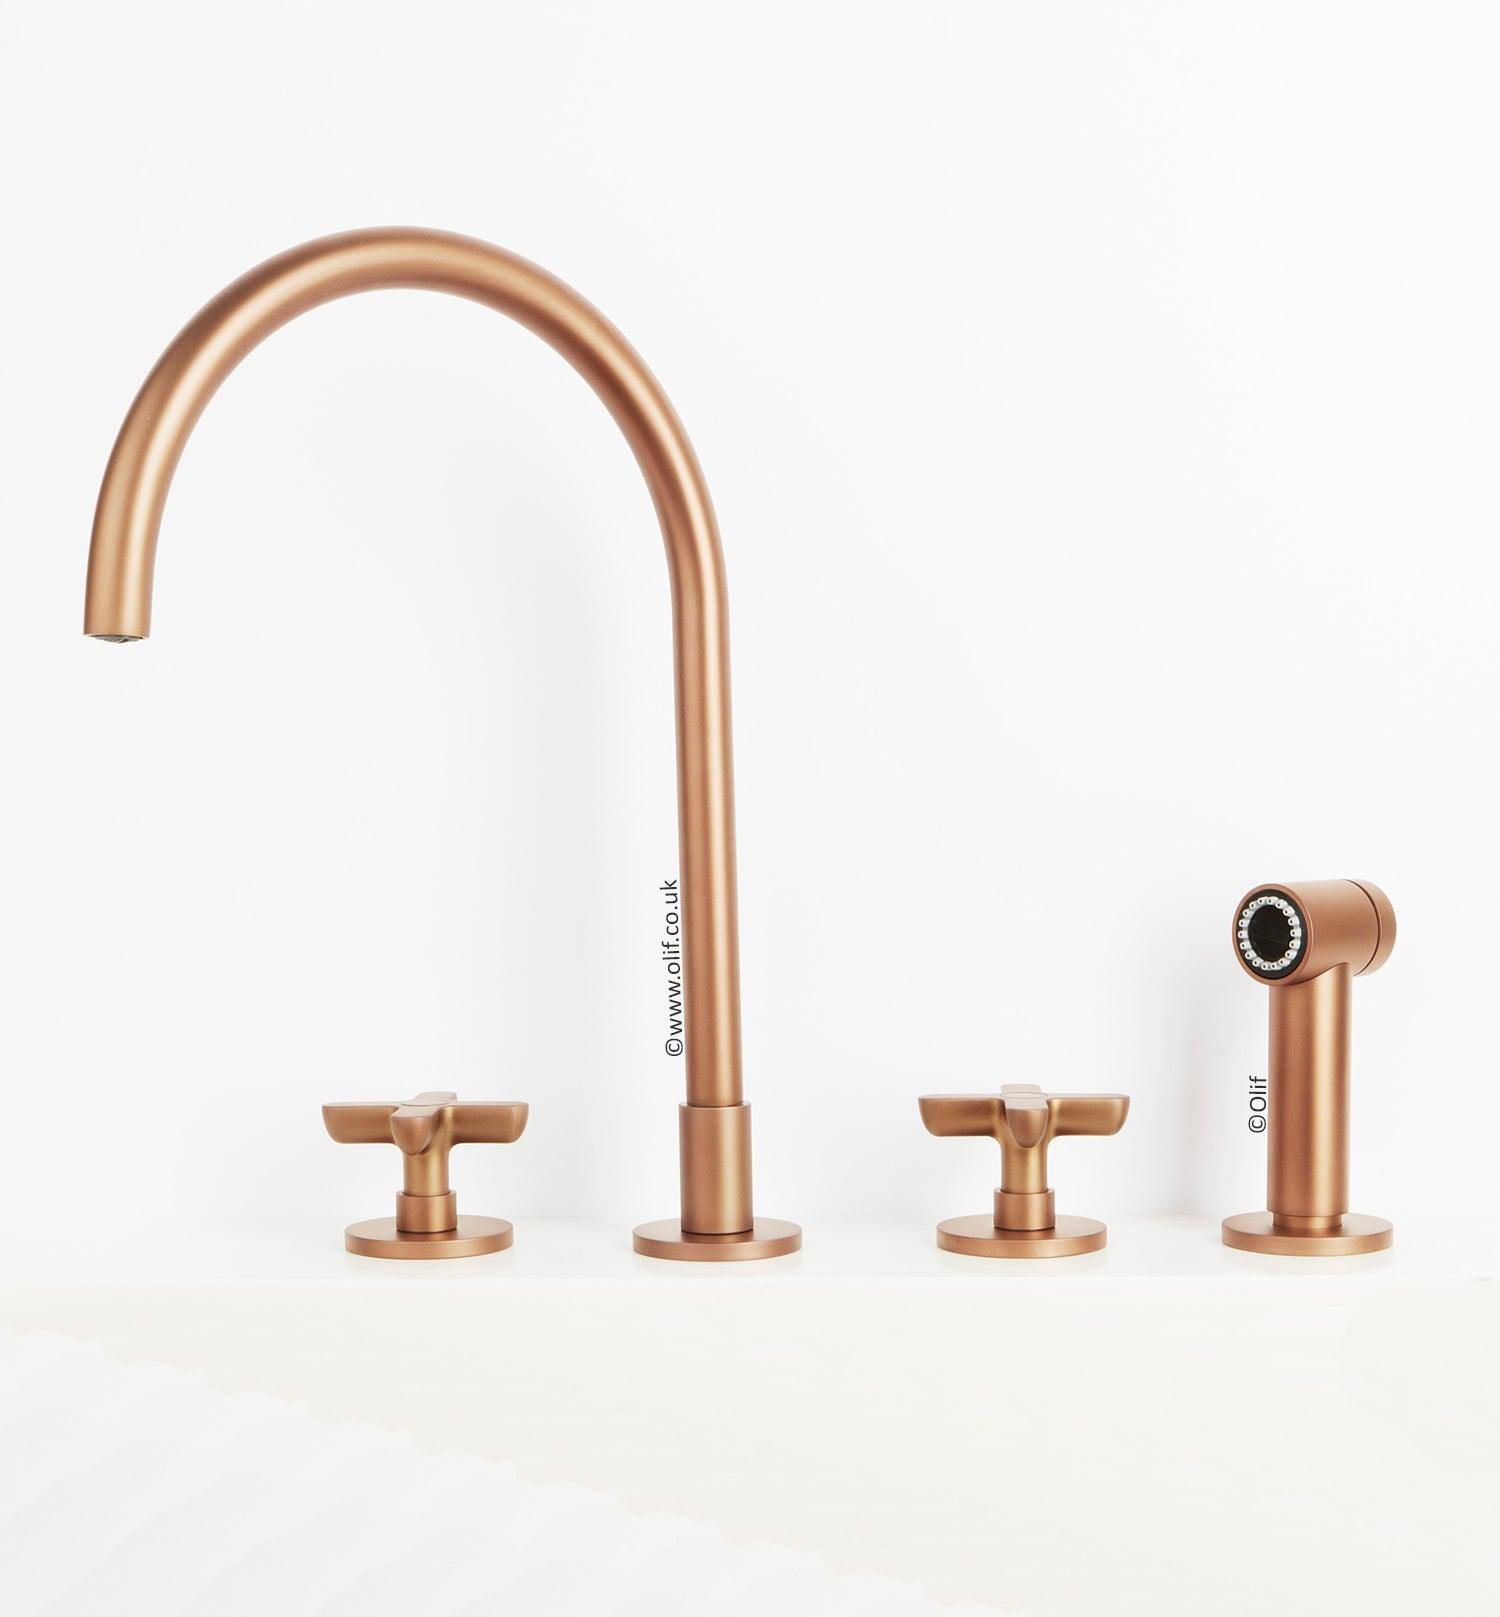 Fantini Icona Classic Matte Copper, kitchen mixer tap with pull out rinser - Olif